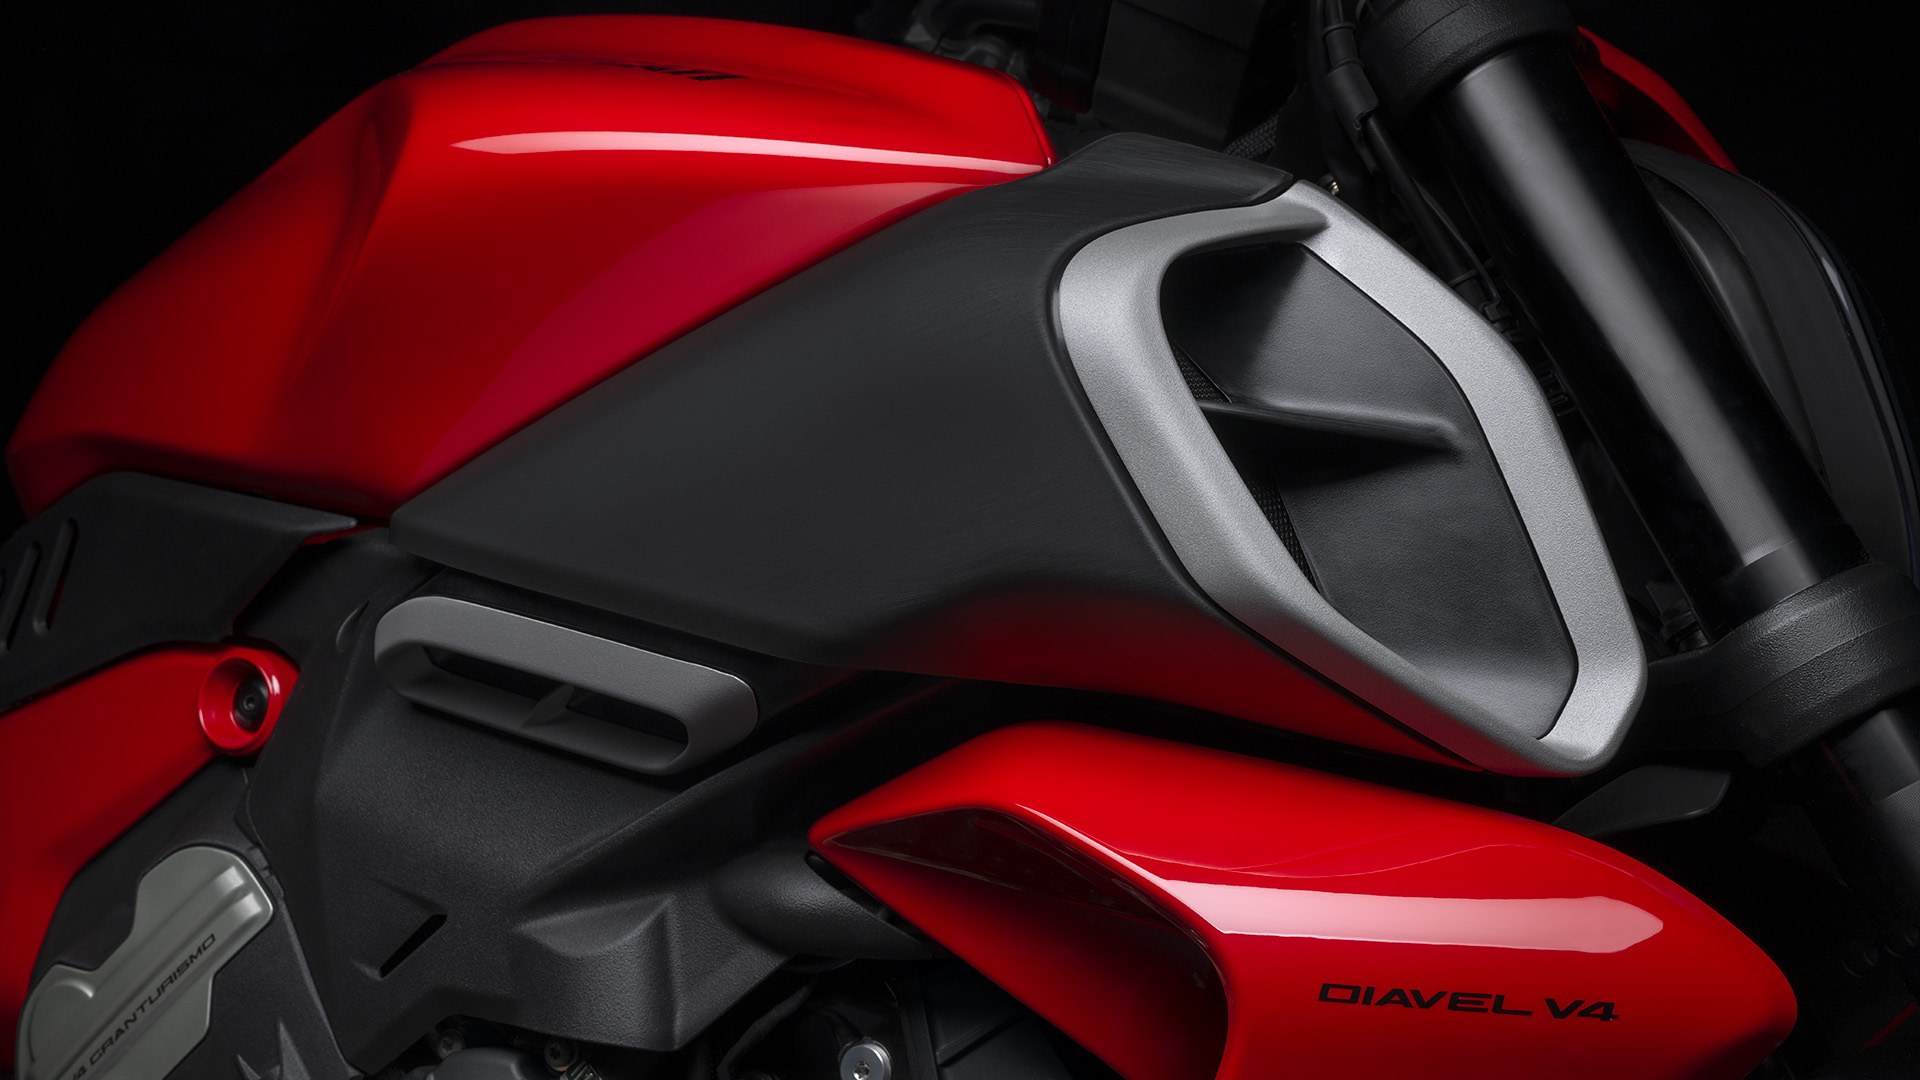 Ducati-Diavel-V4-MY23-overview-gallery-1920x1080-03